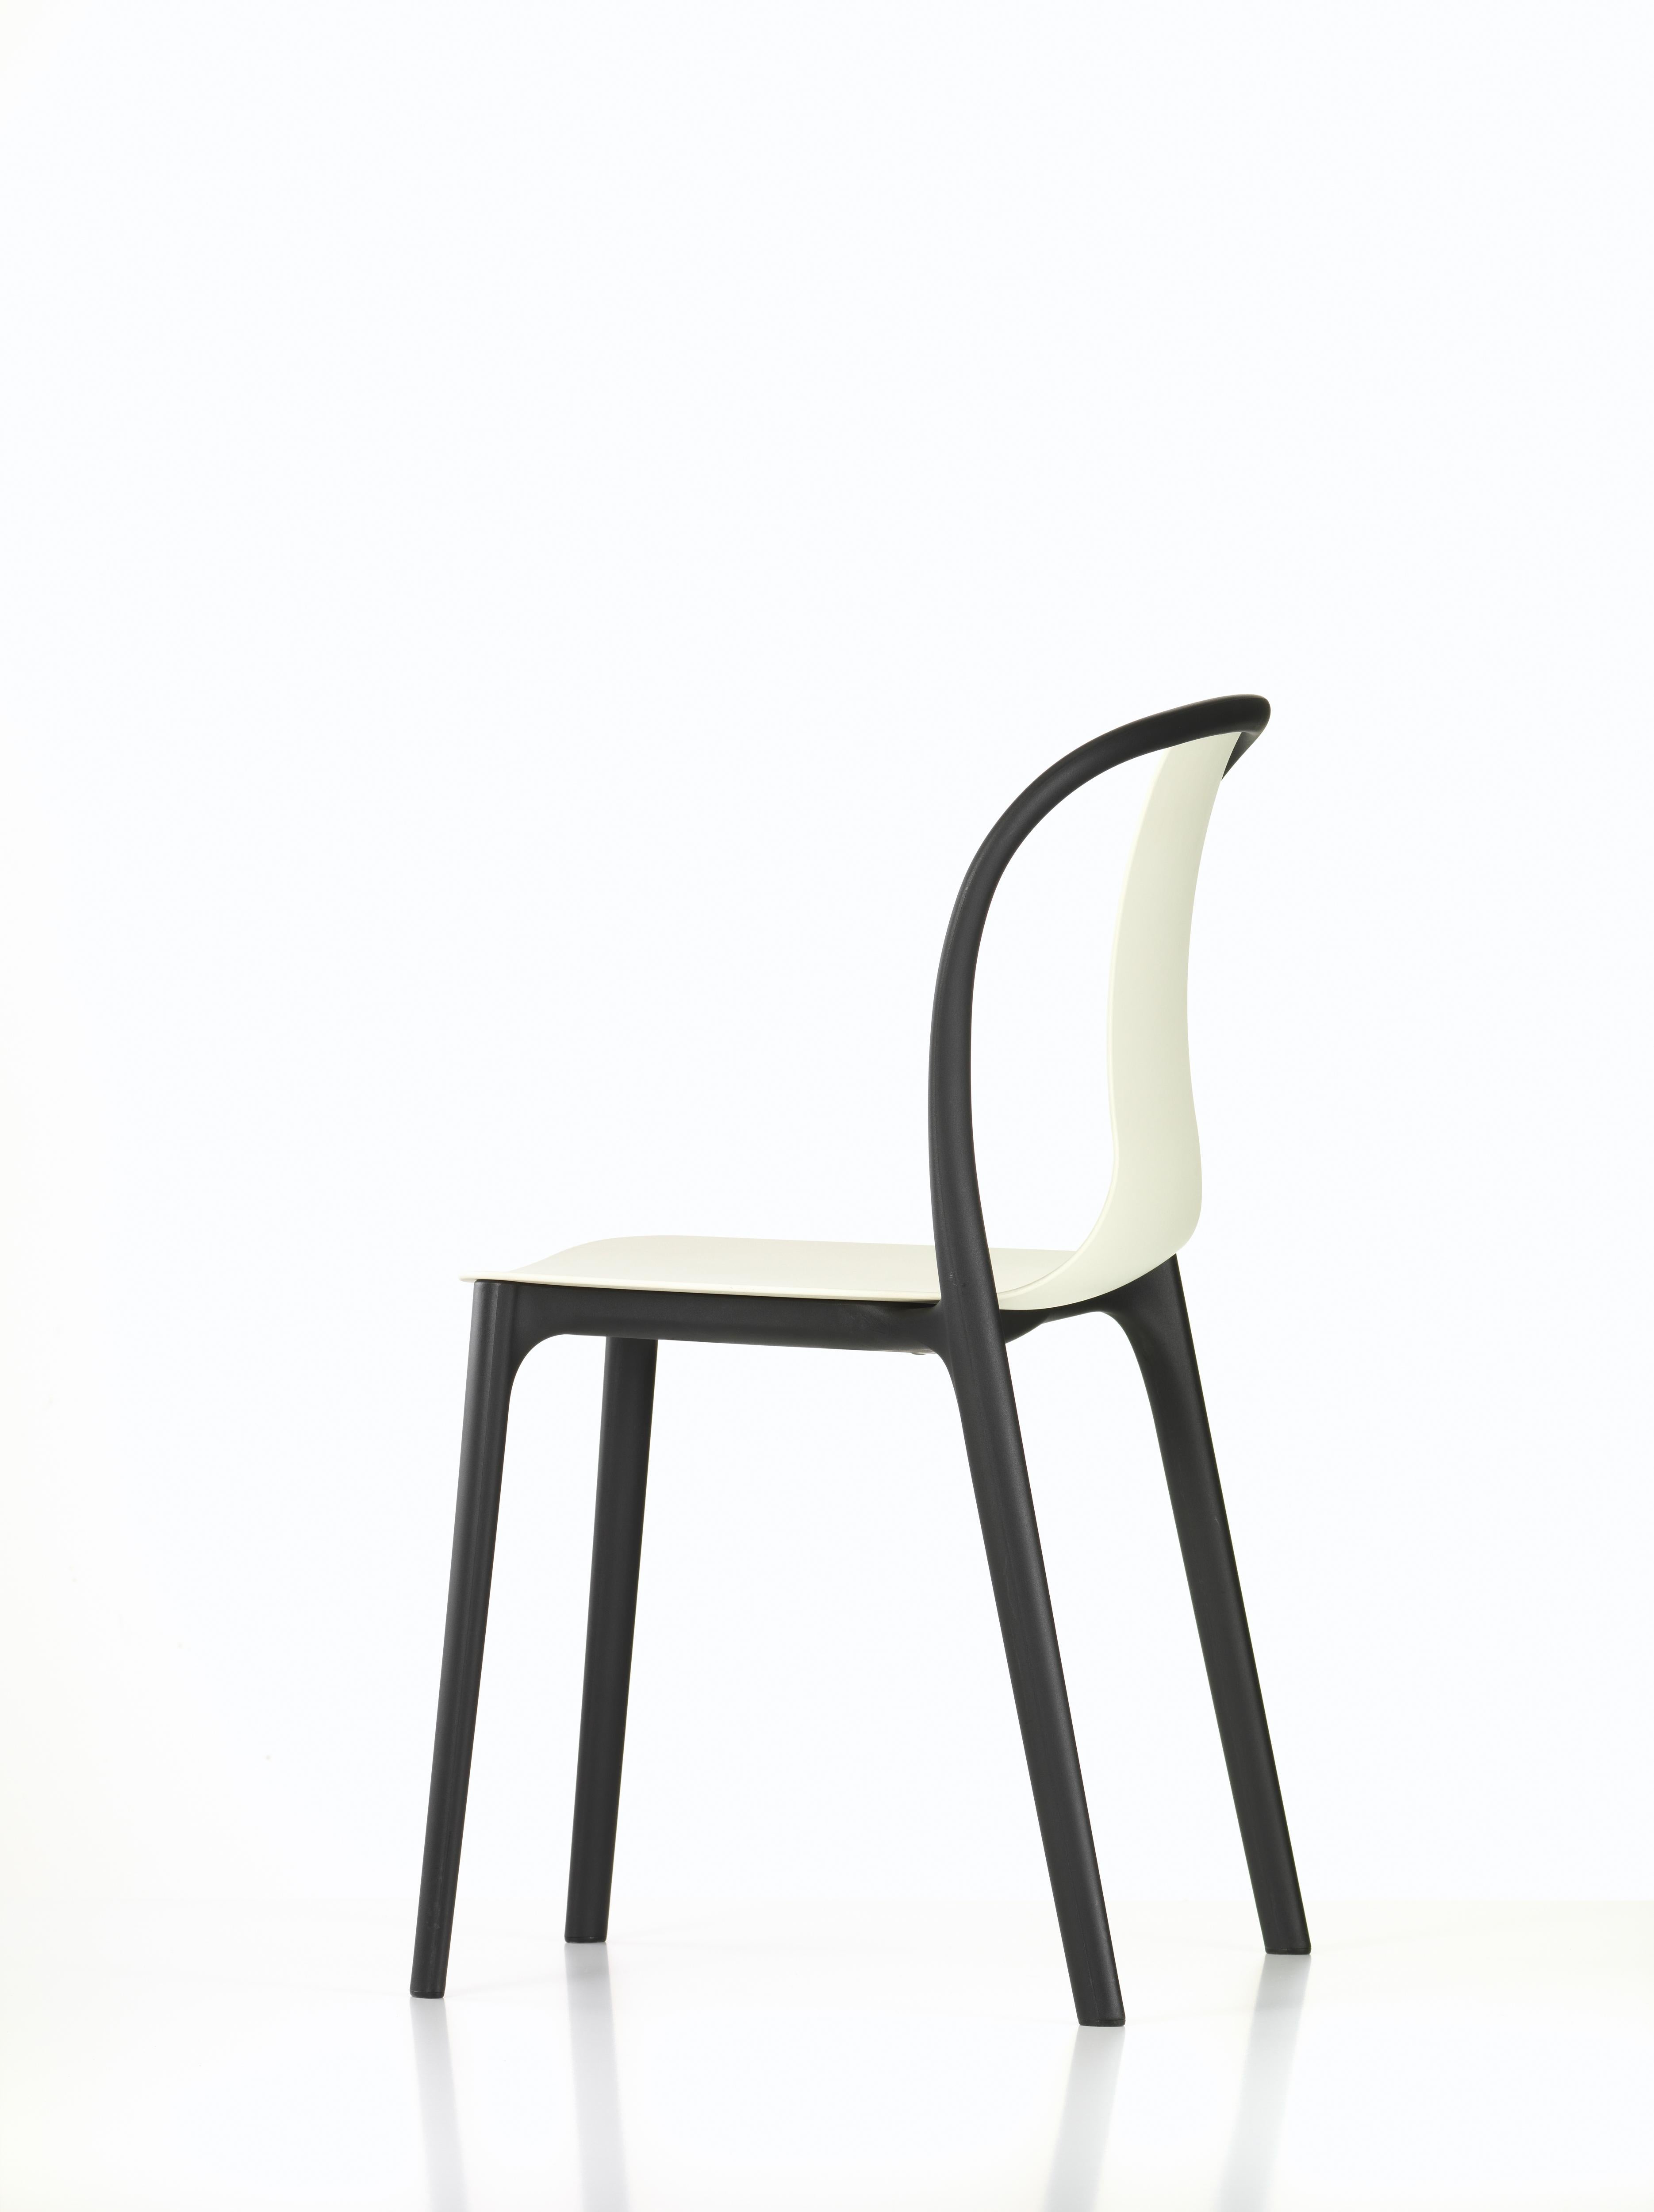 vitra outdoor chair